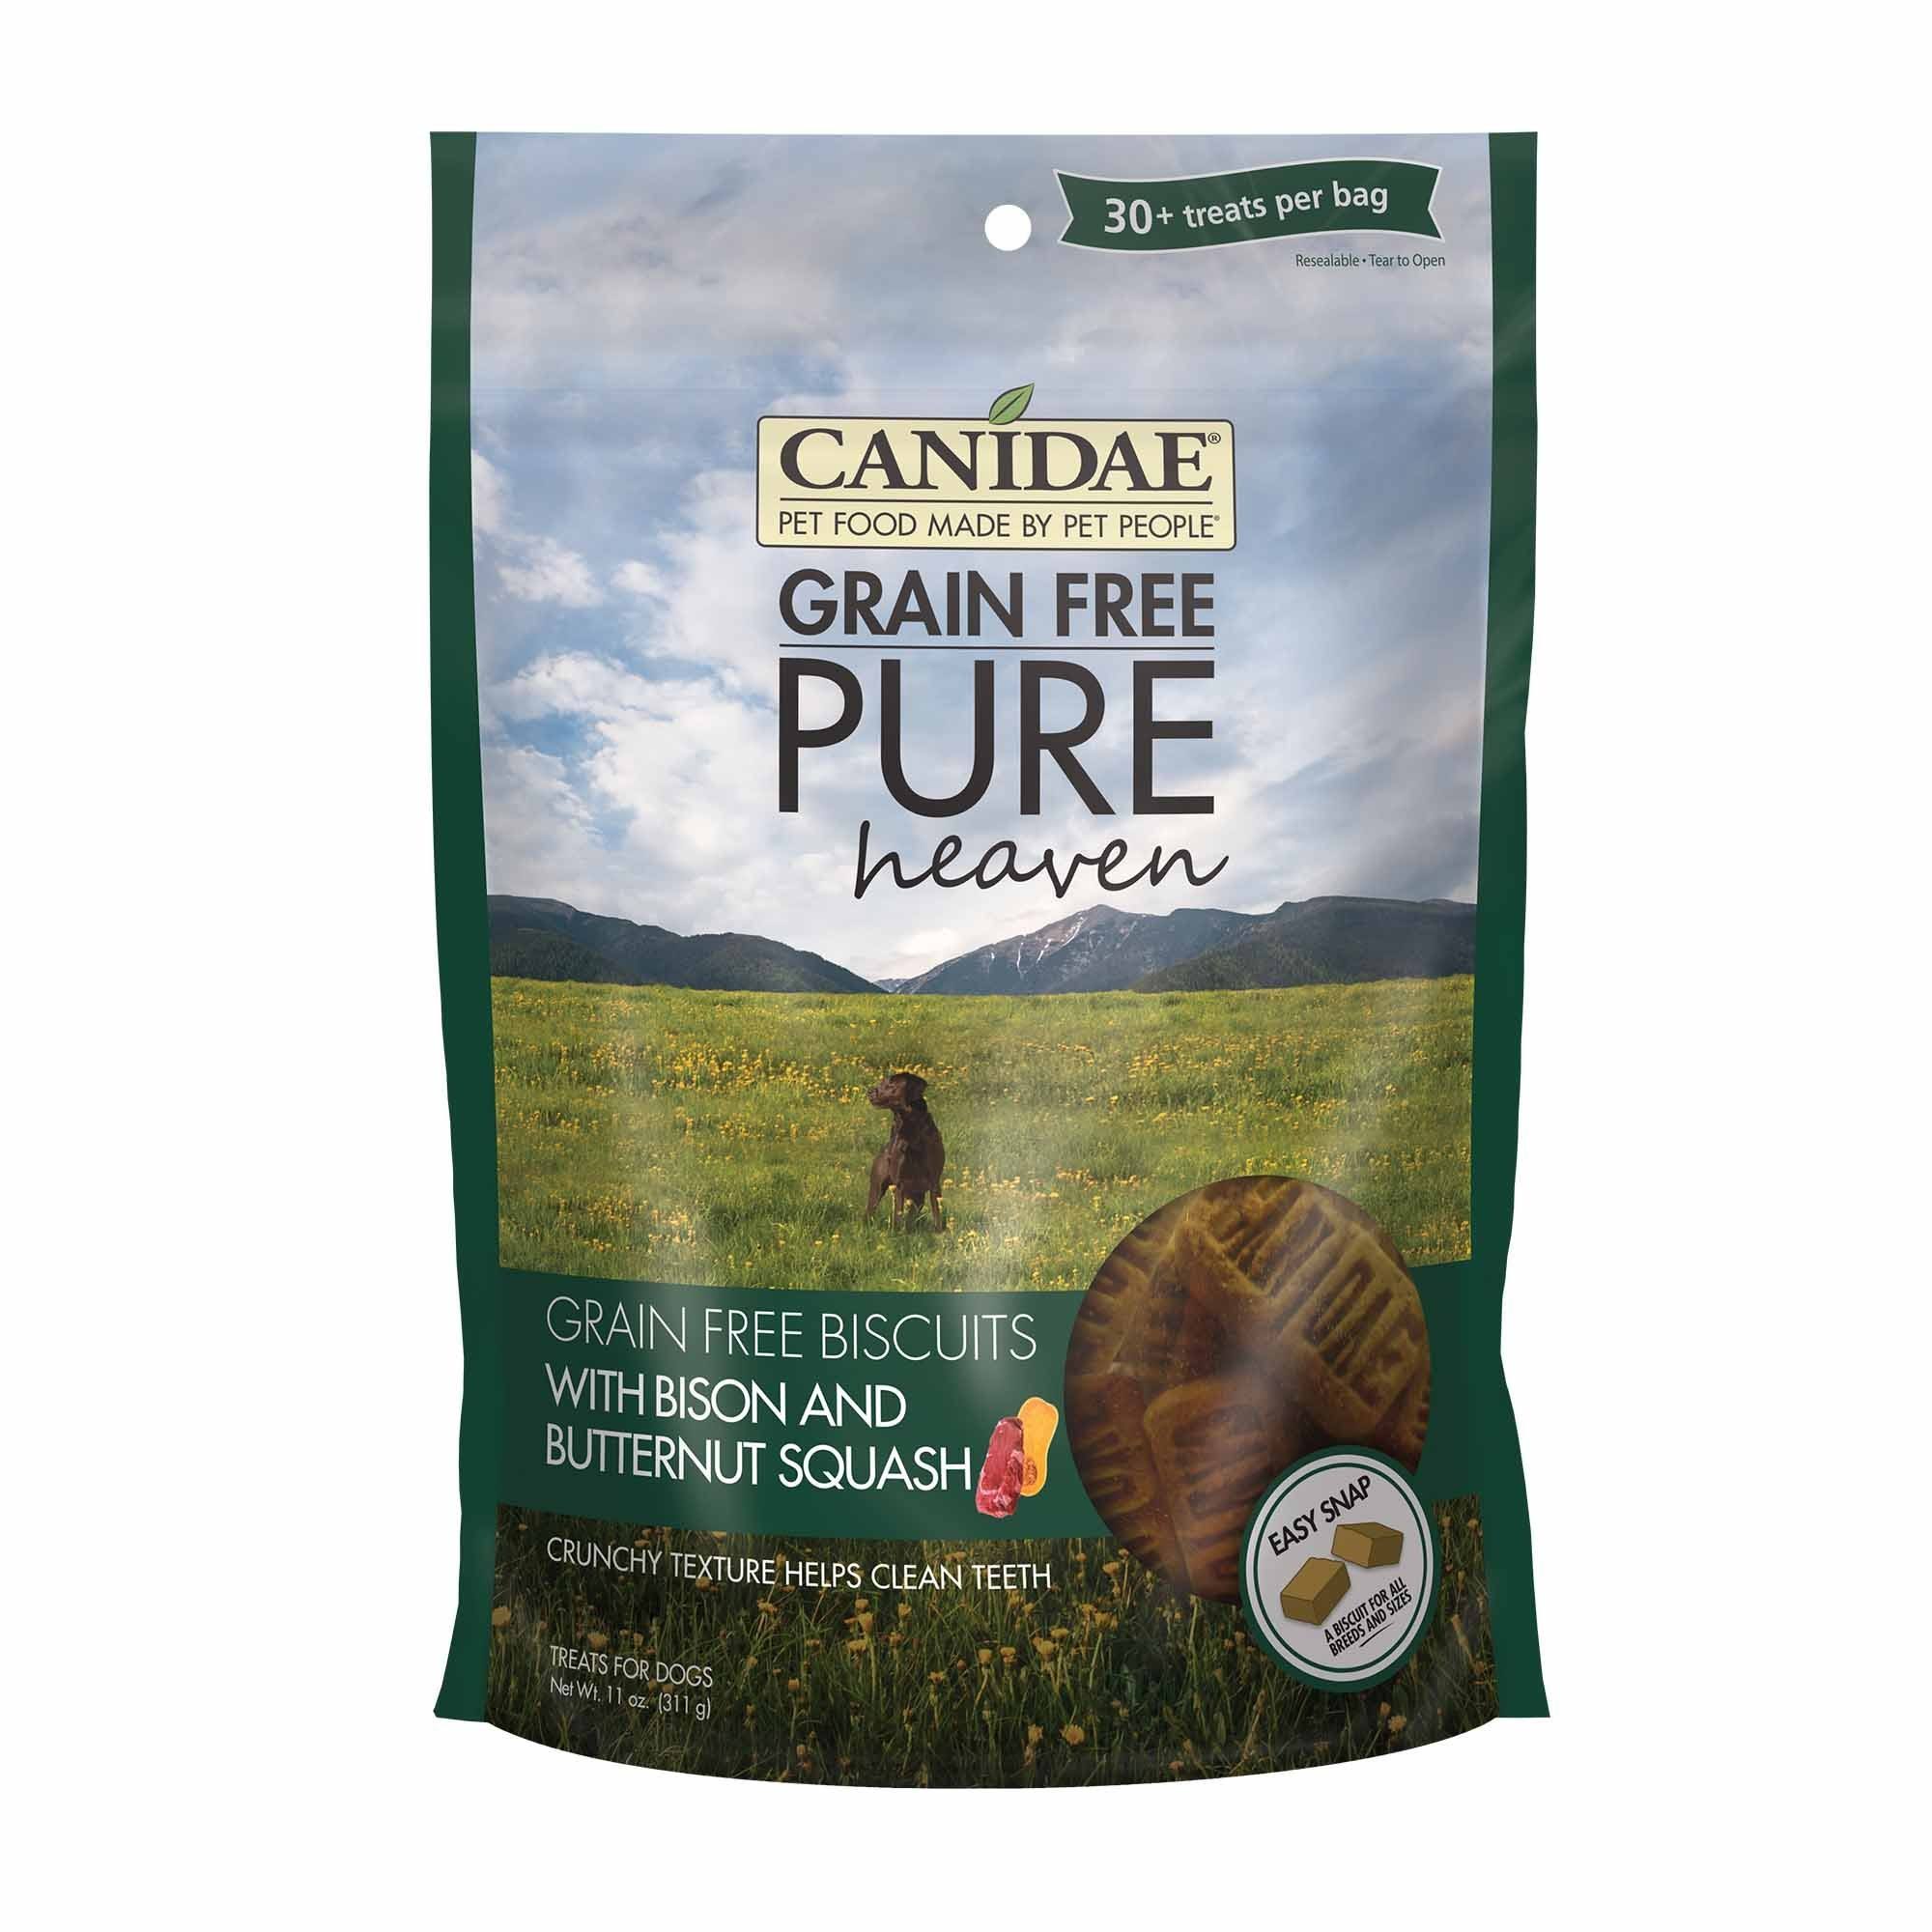 Canidae Grain Free Pure Heaven Dog Biscuits with Bison and Butternut Squash - 11oz